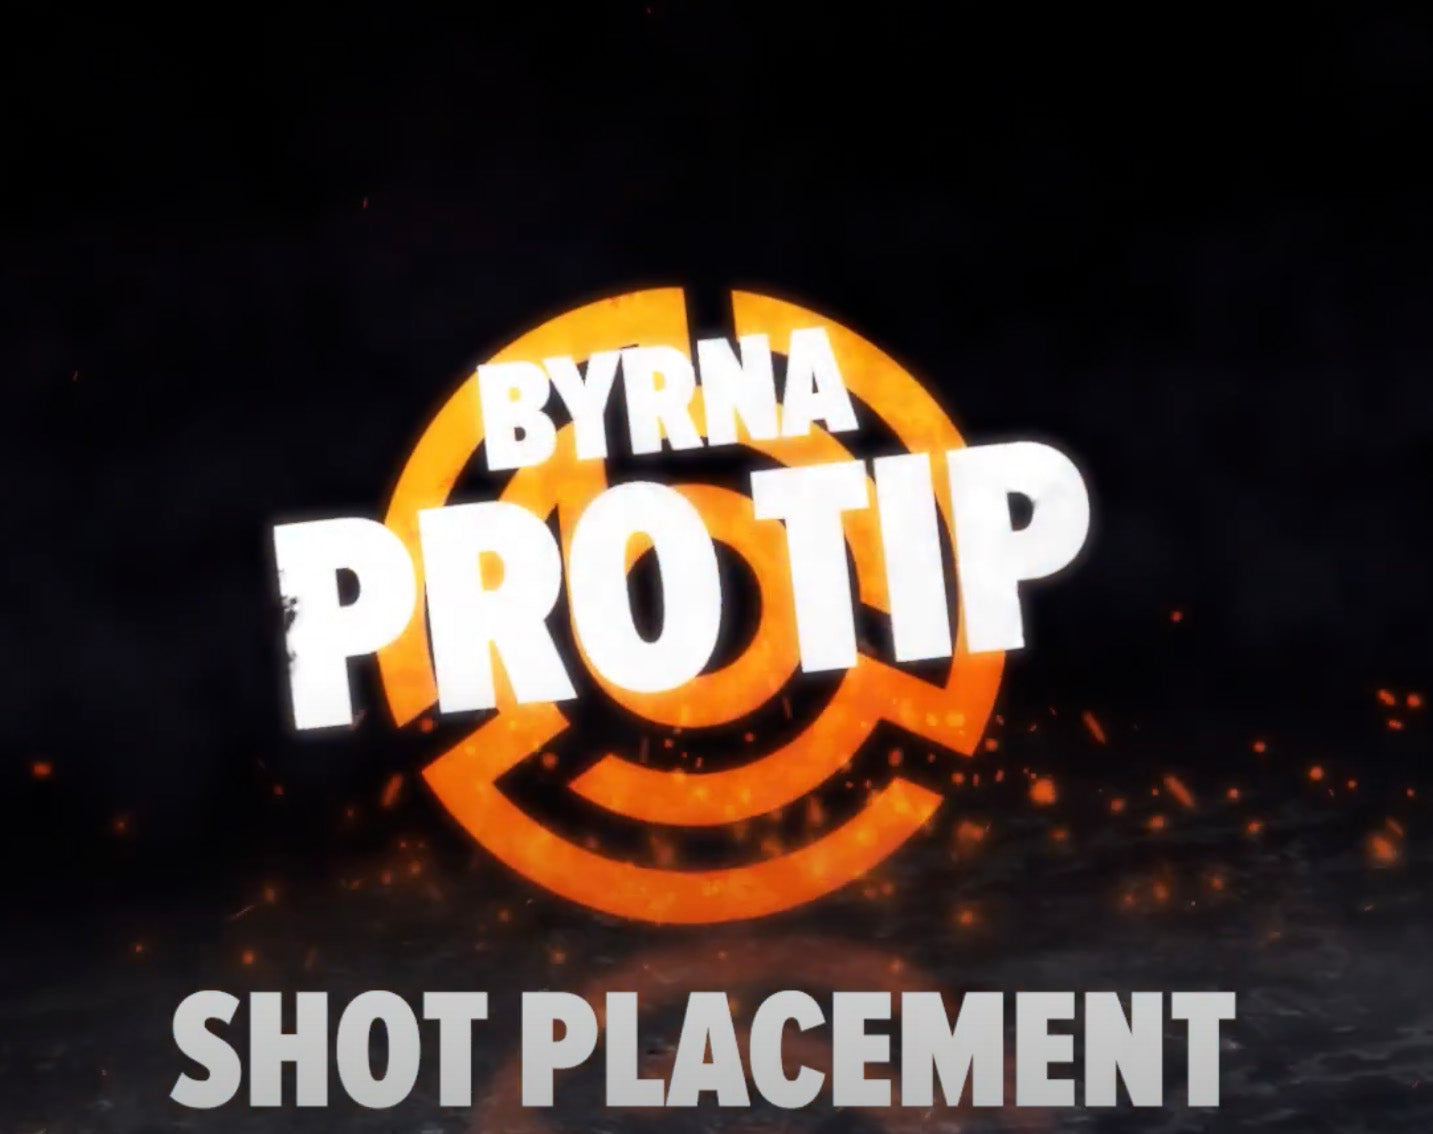 Byrna Pro Tip: Shot Placement